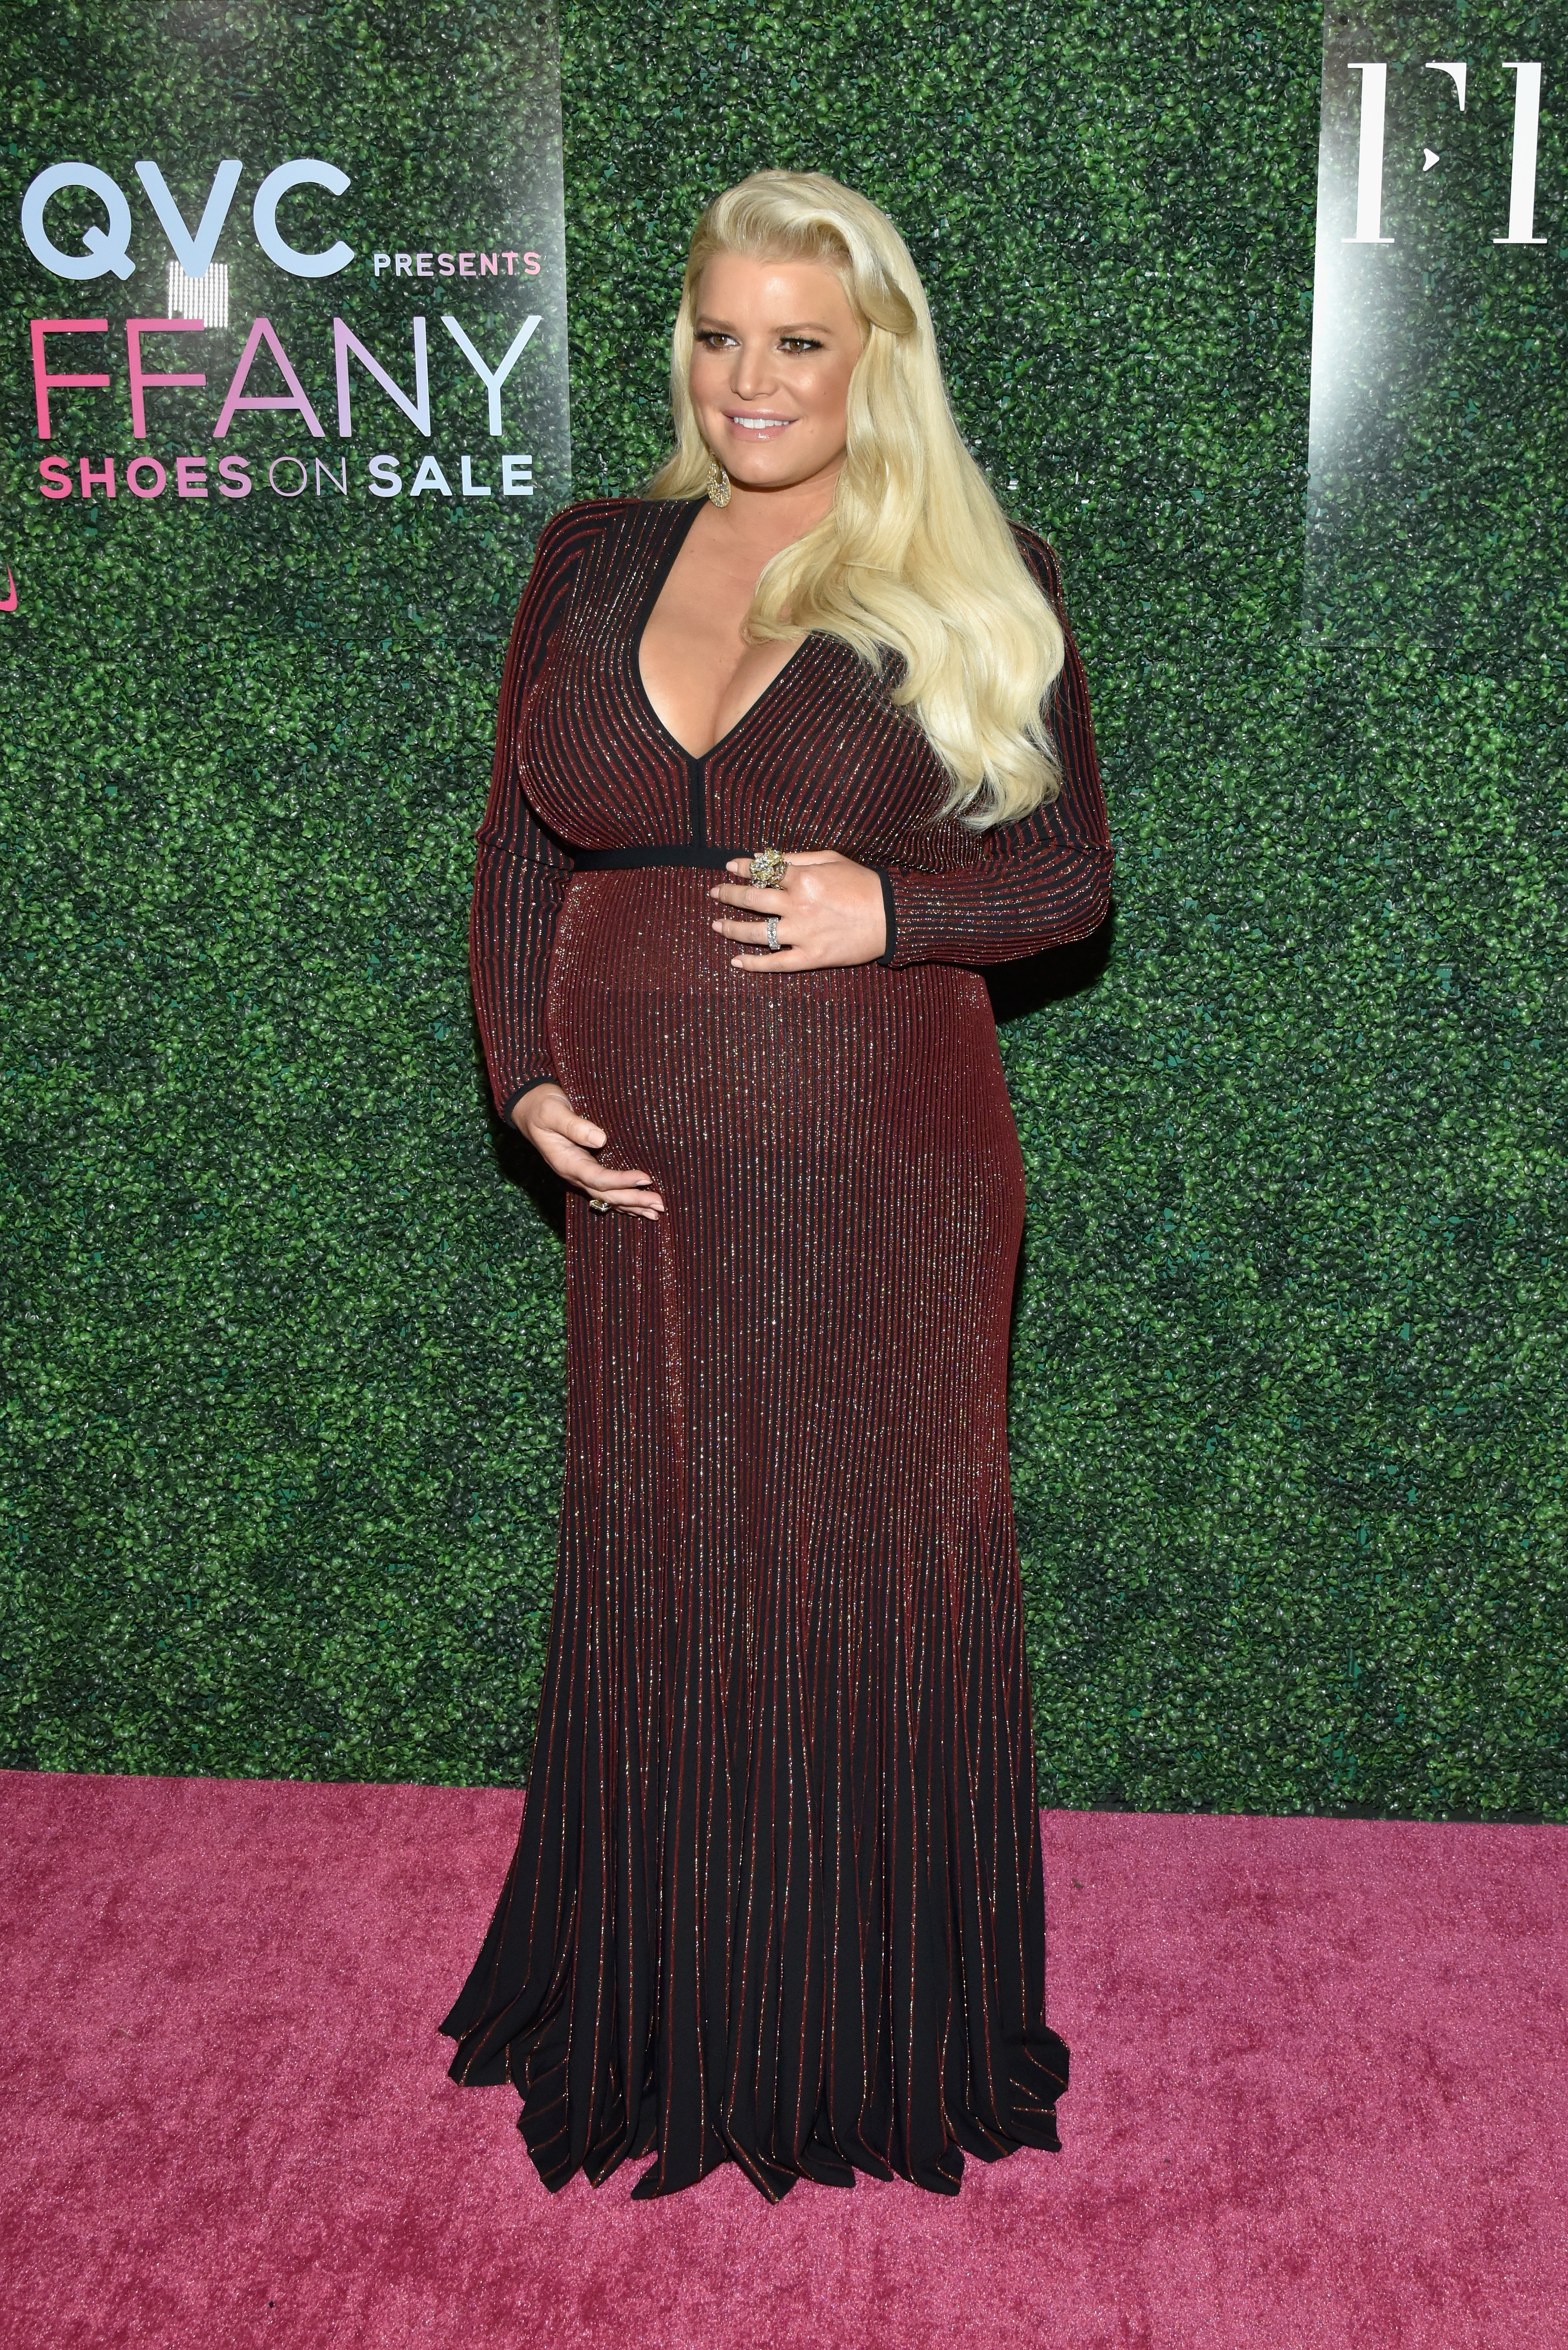 Jessica Simpson/Getty Images